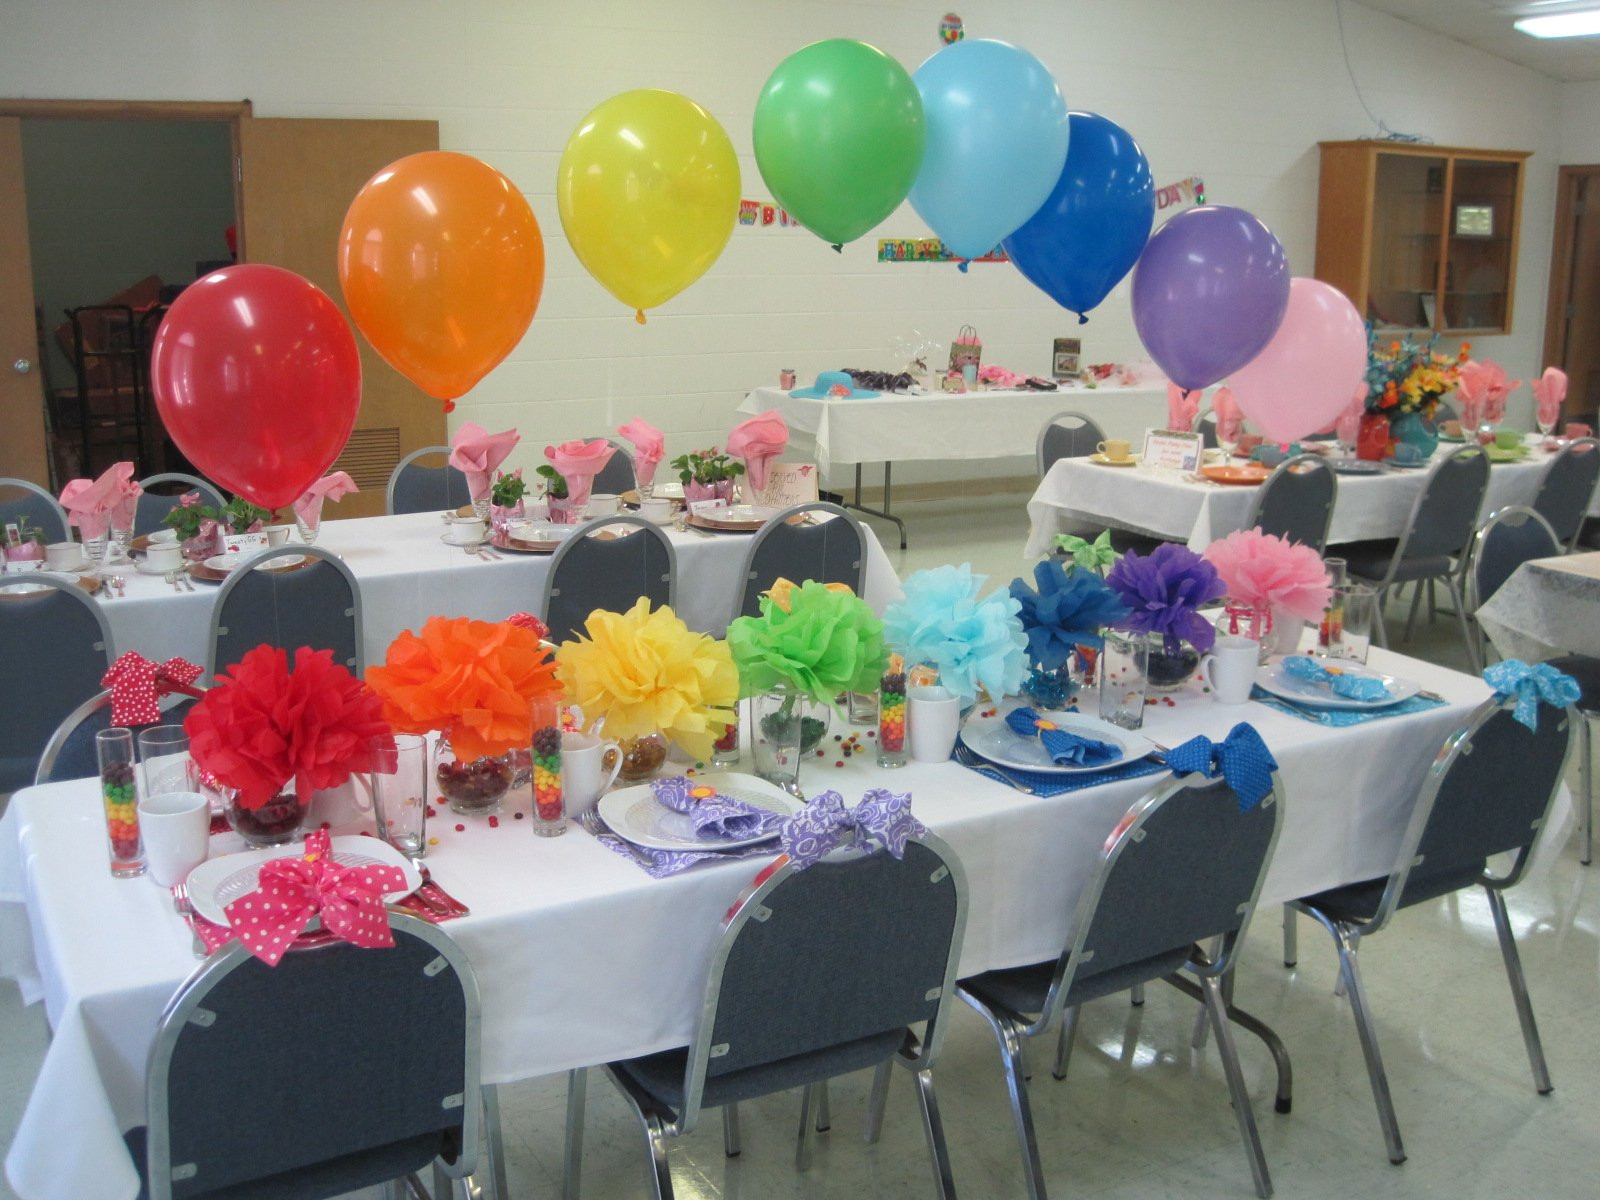 Family Retirement Party Ideas
 The top 22 Ideas About Family Retirement Party Ideas